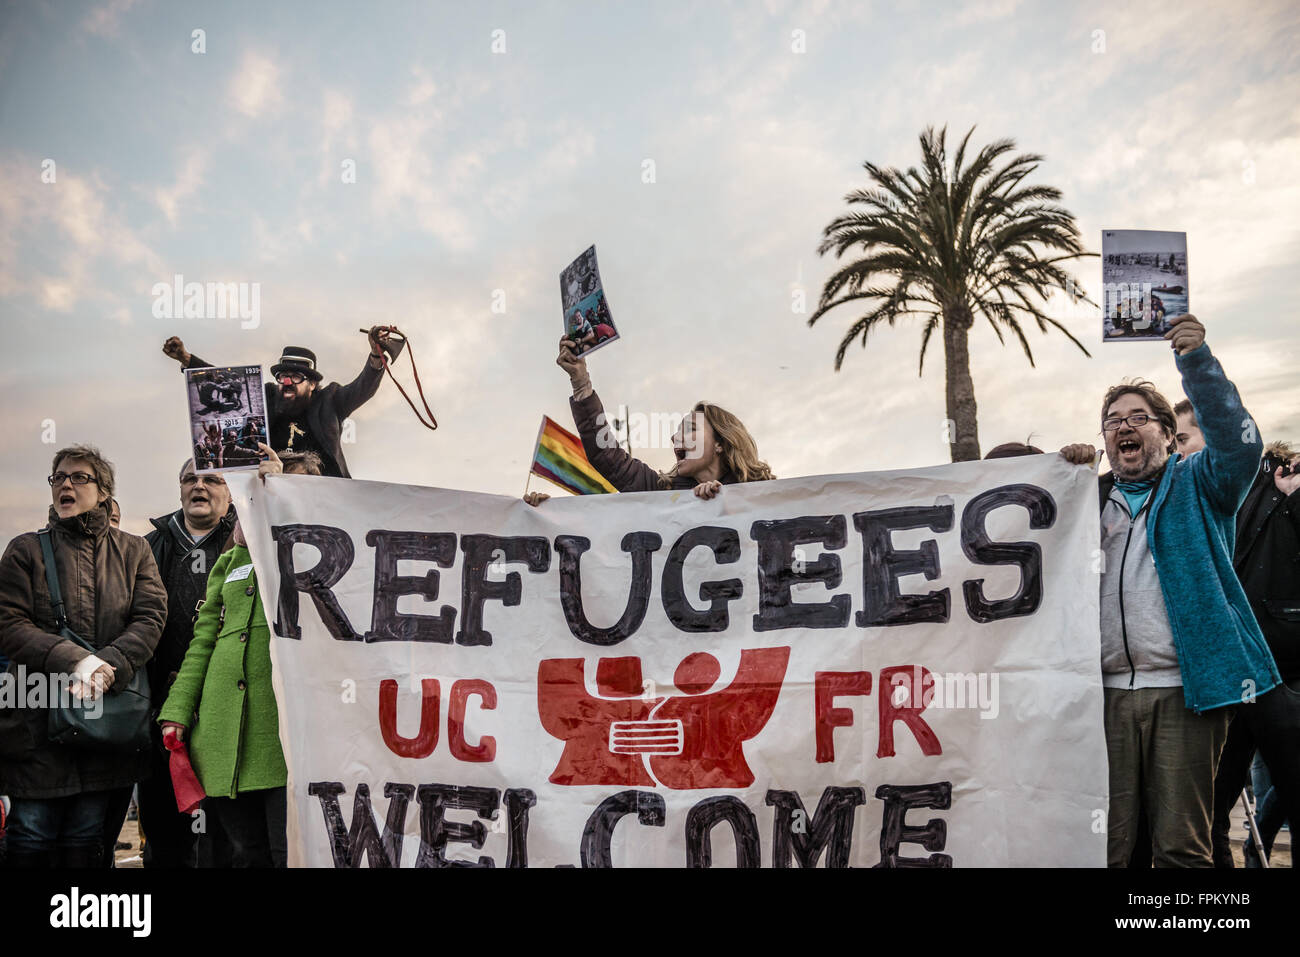 Barcelona, Catalonia, Spain. 19th Mar, 2016. Activists behind their banner shout slogans at the beach of Barcelona during an anti-racism protest © Matthias Oesterle/ZUMA Wire/Alamy Live News Stock Photo